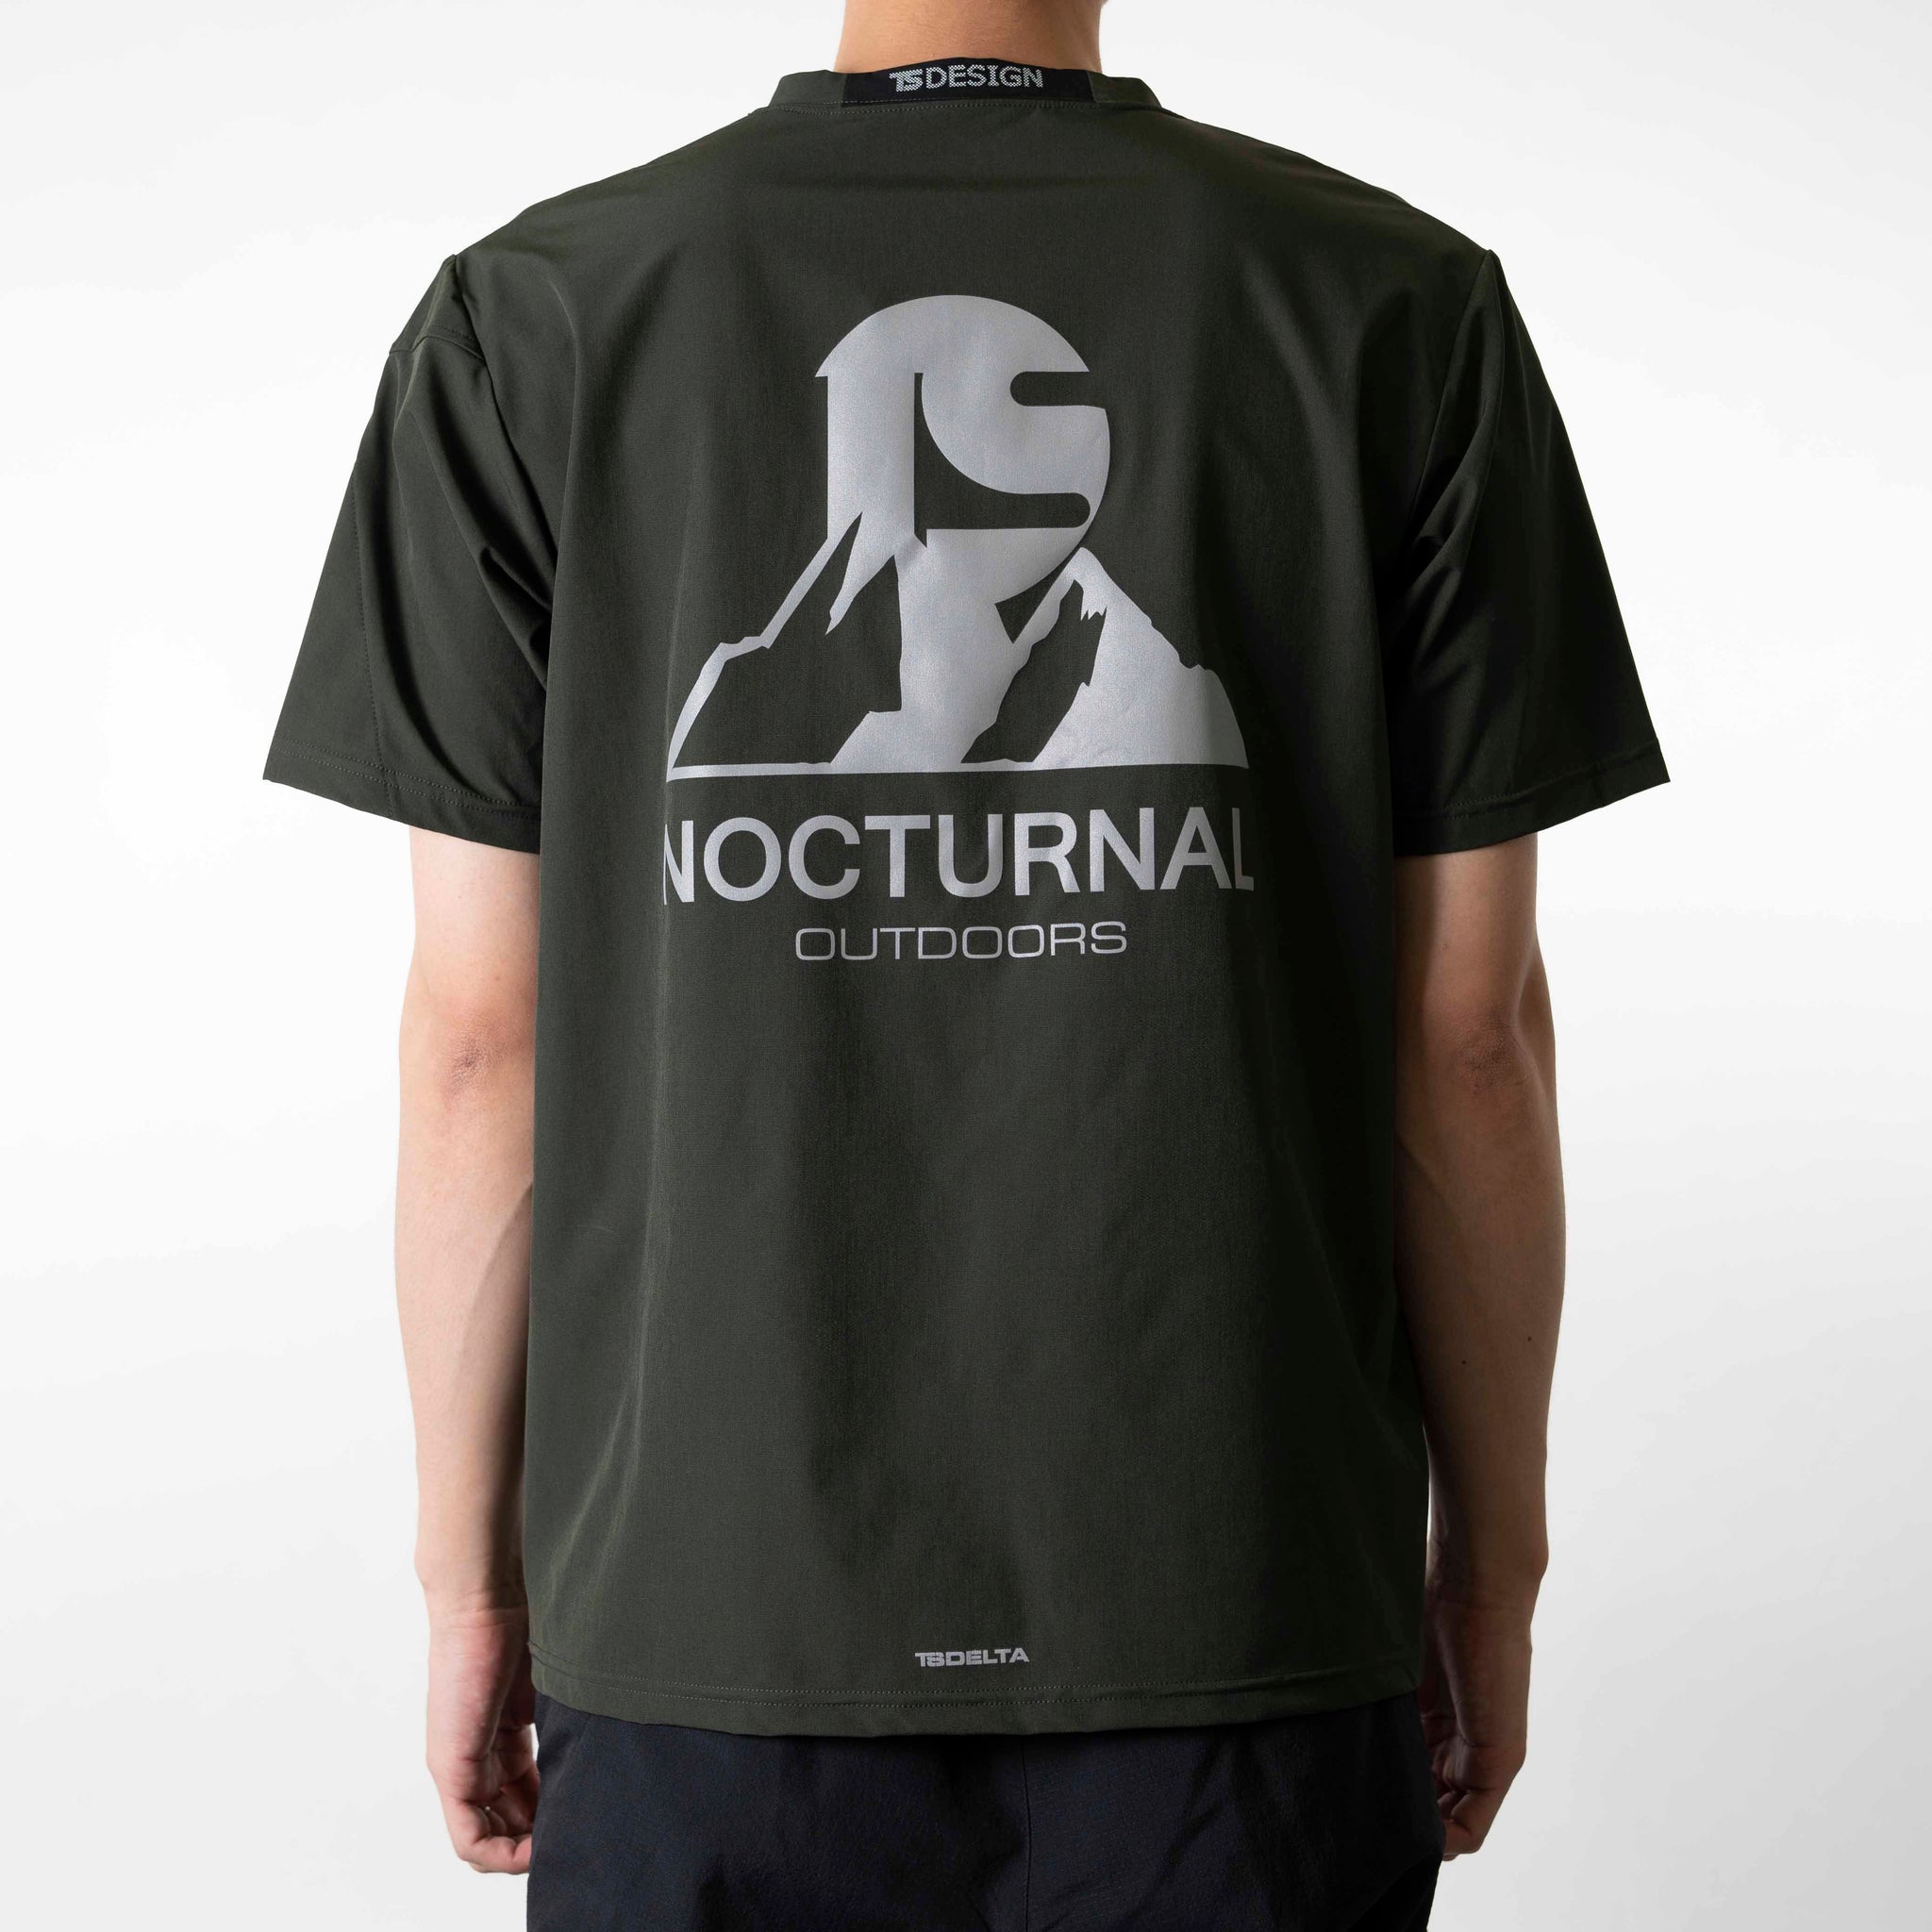 TS NOCTURNAL 83551C1